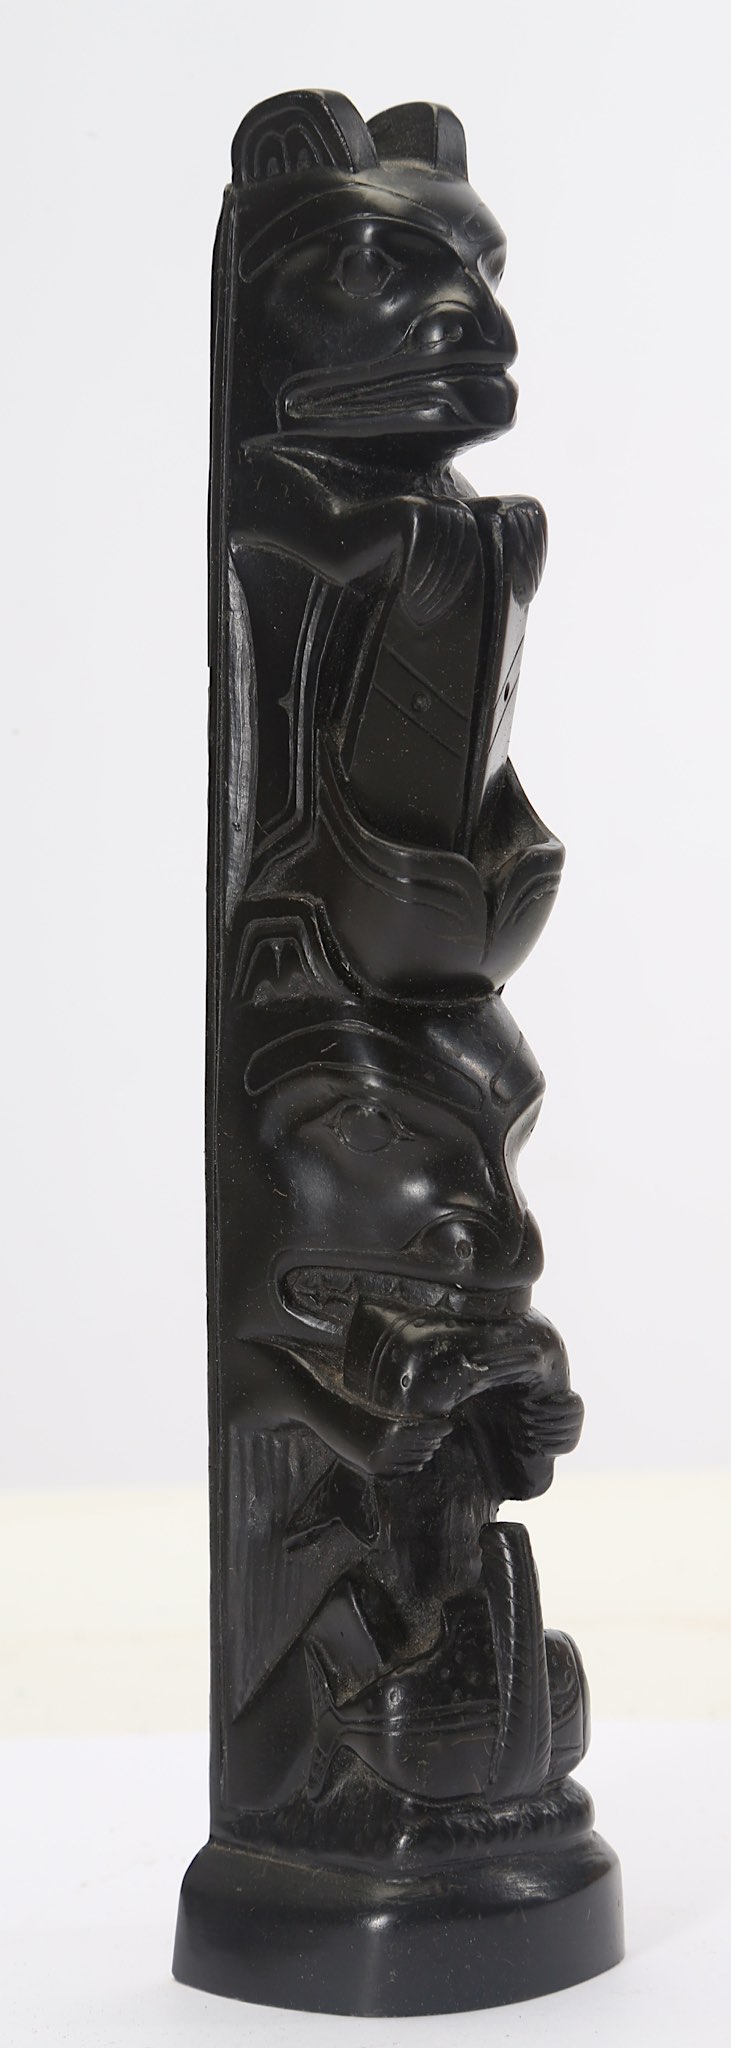 AN ARGILLITE TOTEM, HAIDA TRIBE In the form of two seated bears atop one another, 19.7cm high, - Image 4 of 5